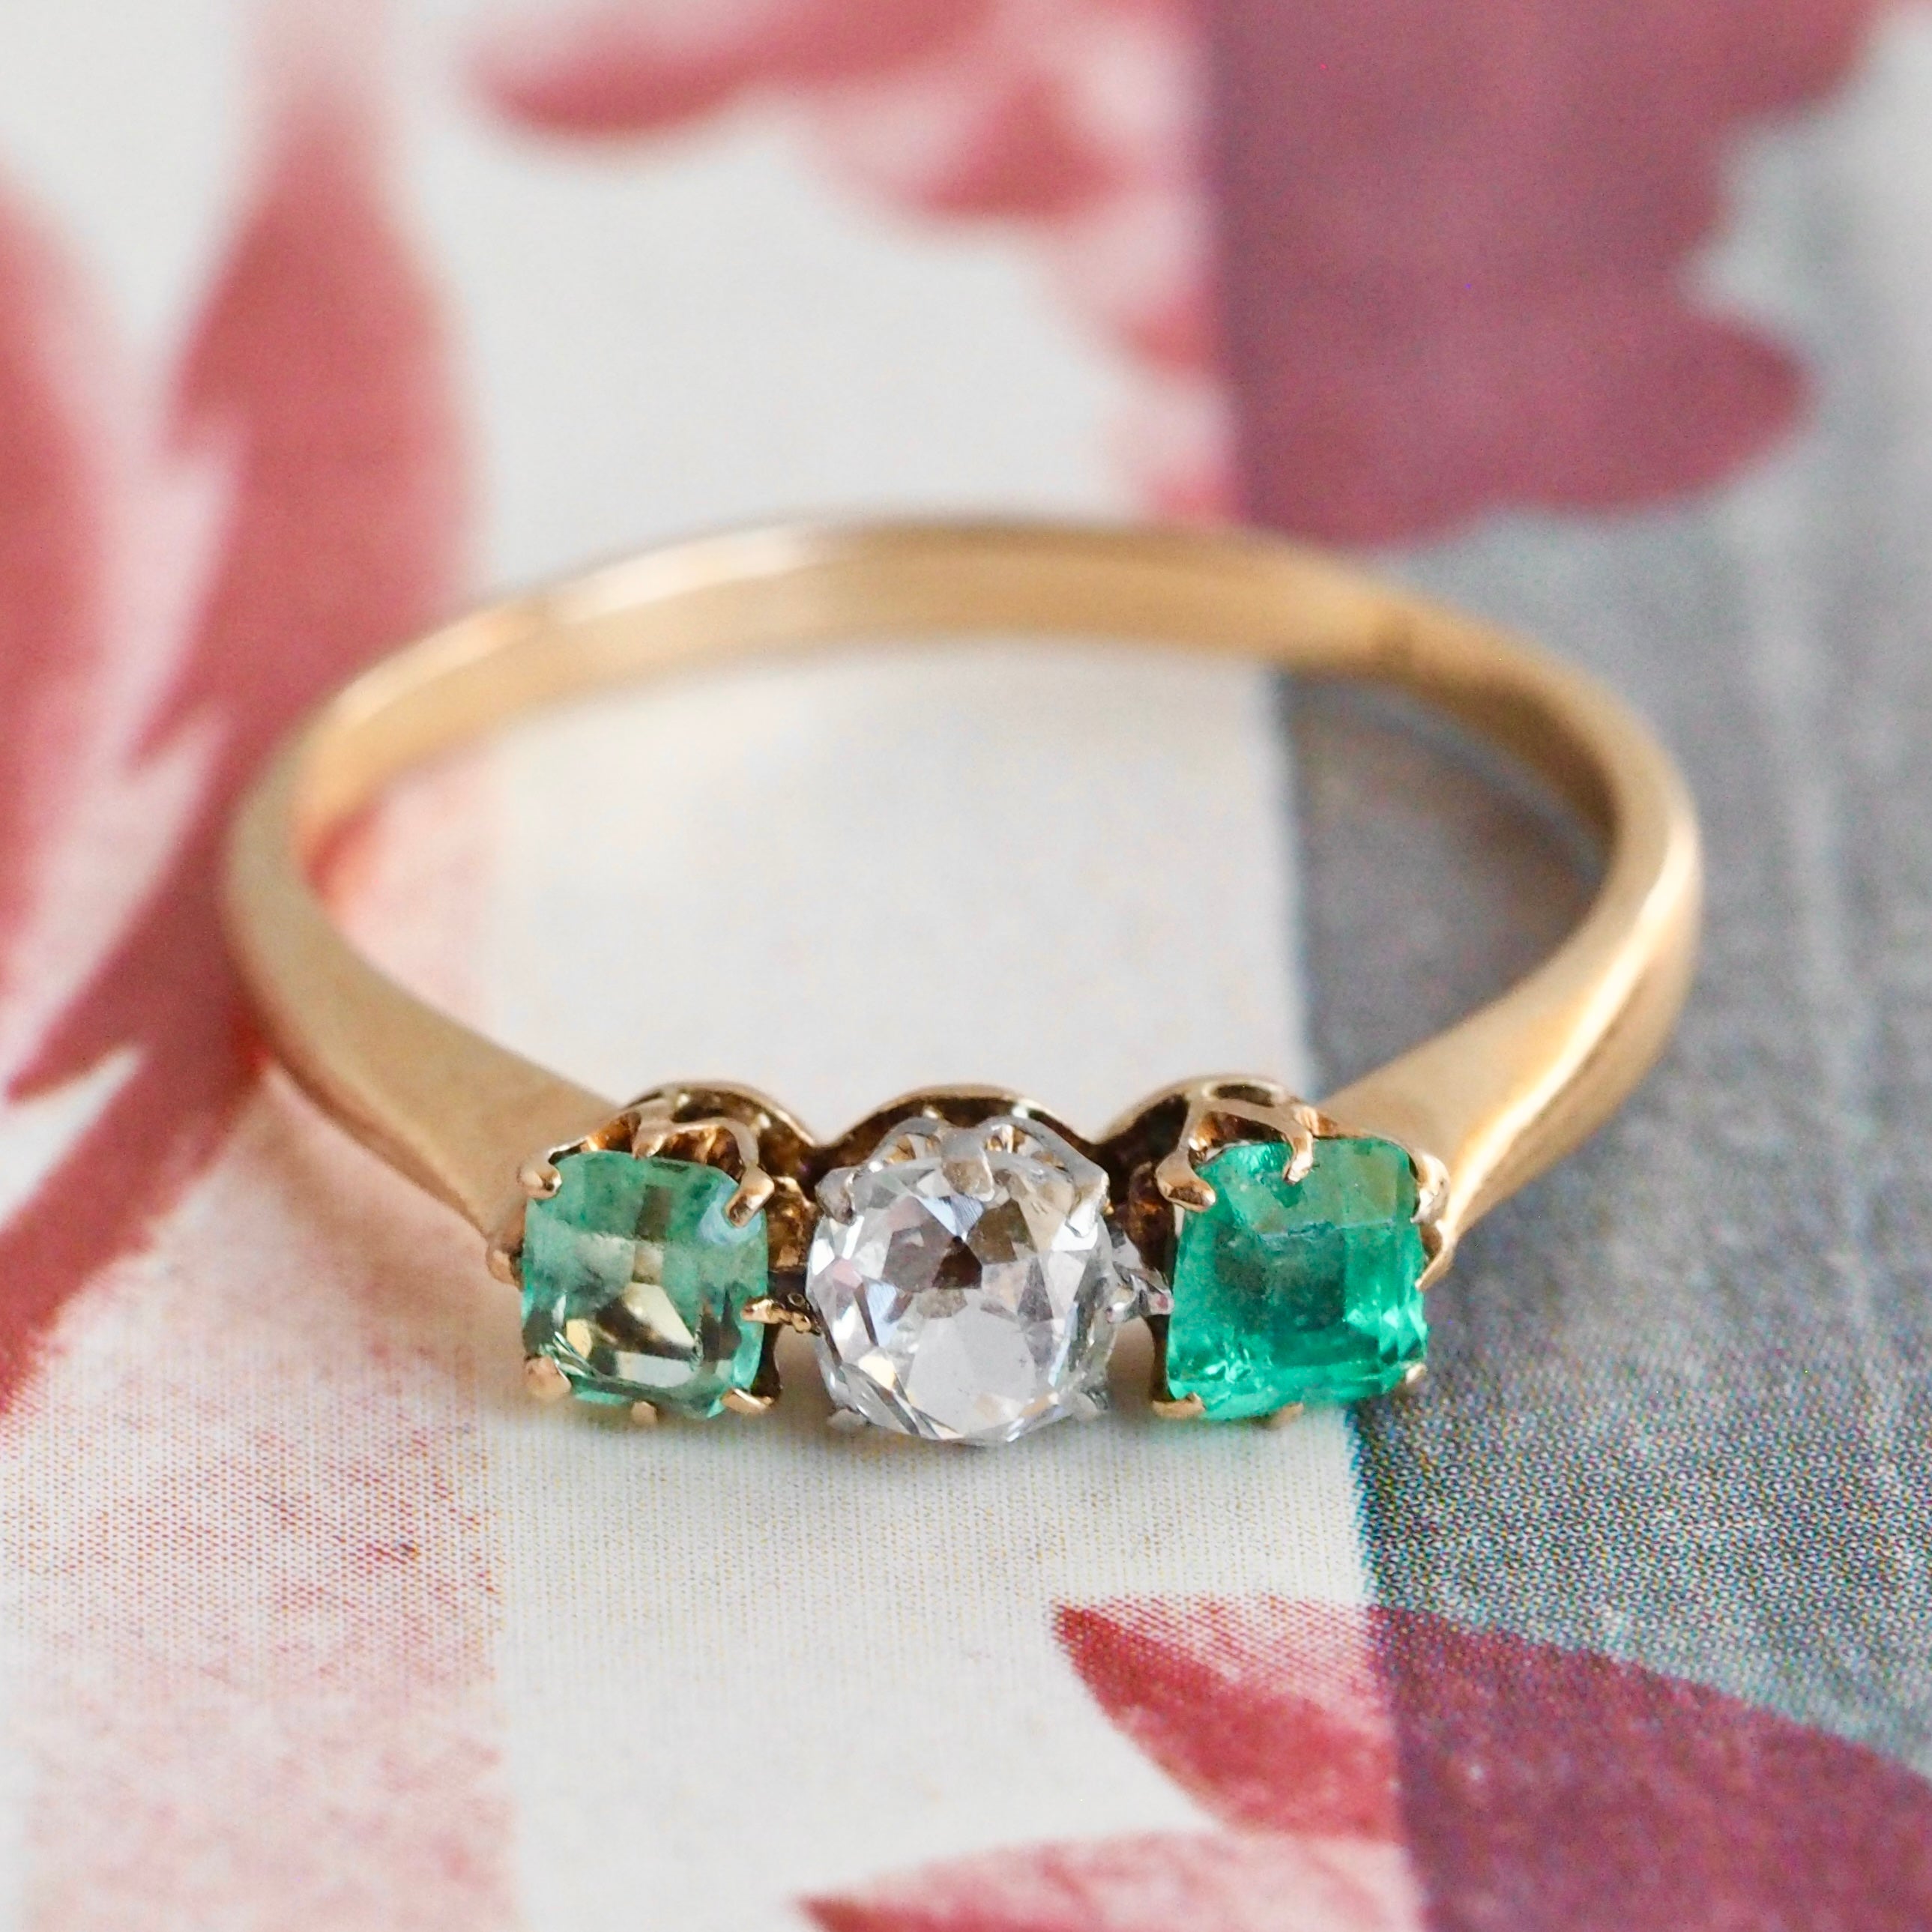 Antique Victorian 14k Gold Emerald and Old Mine Cut Diamond Trilogy Ring